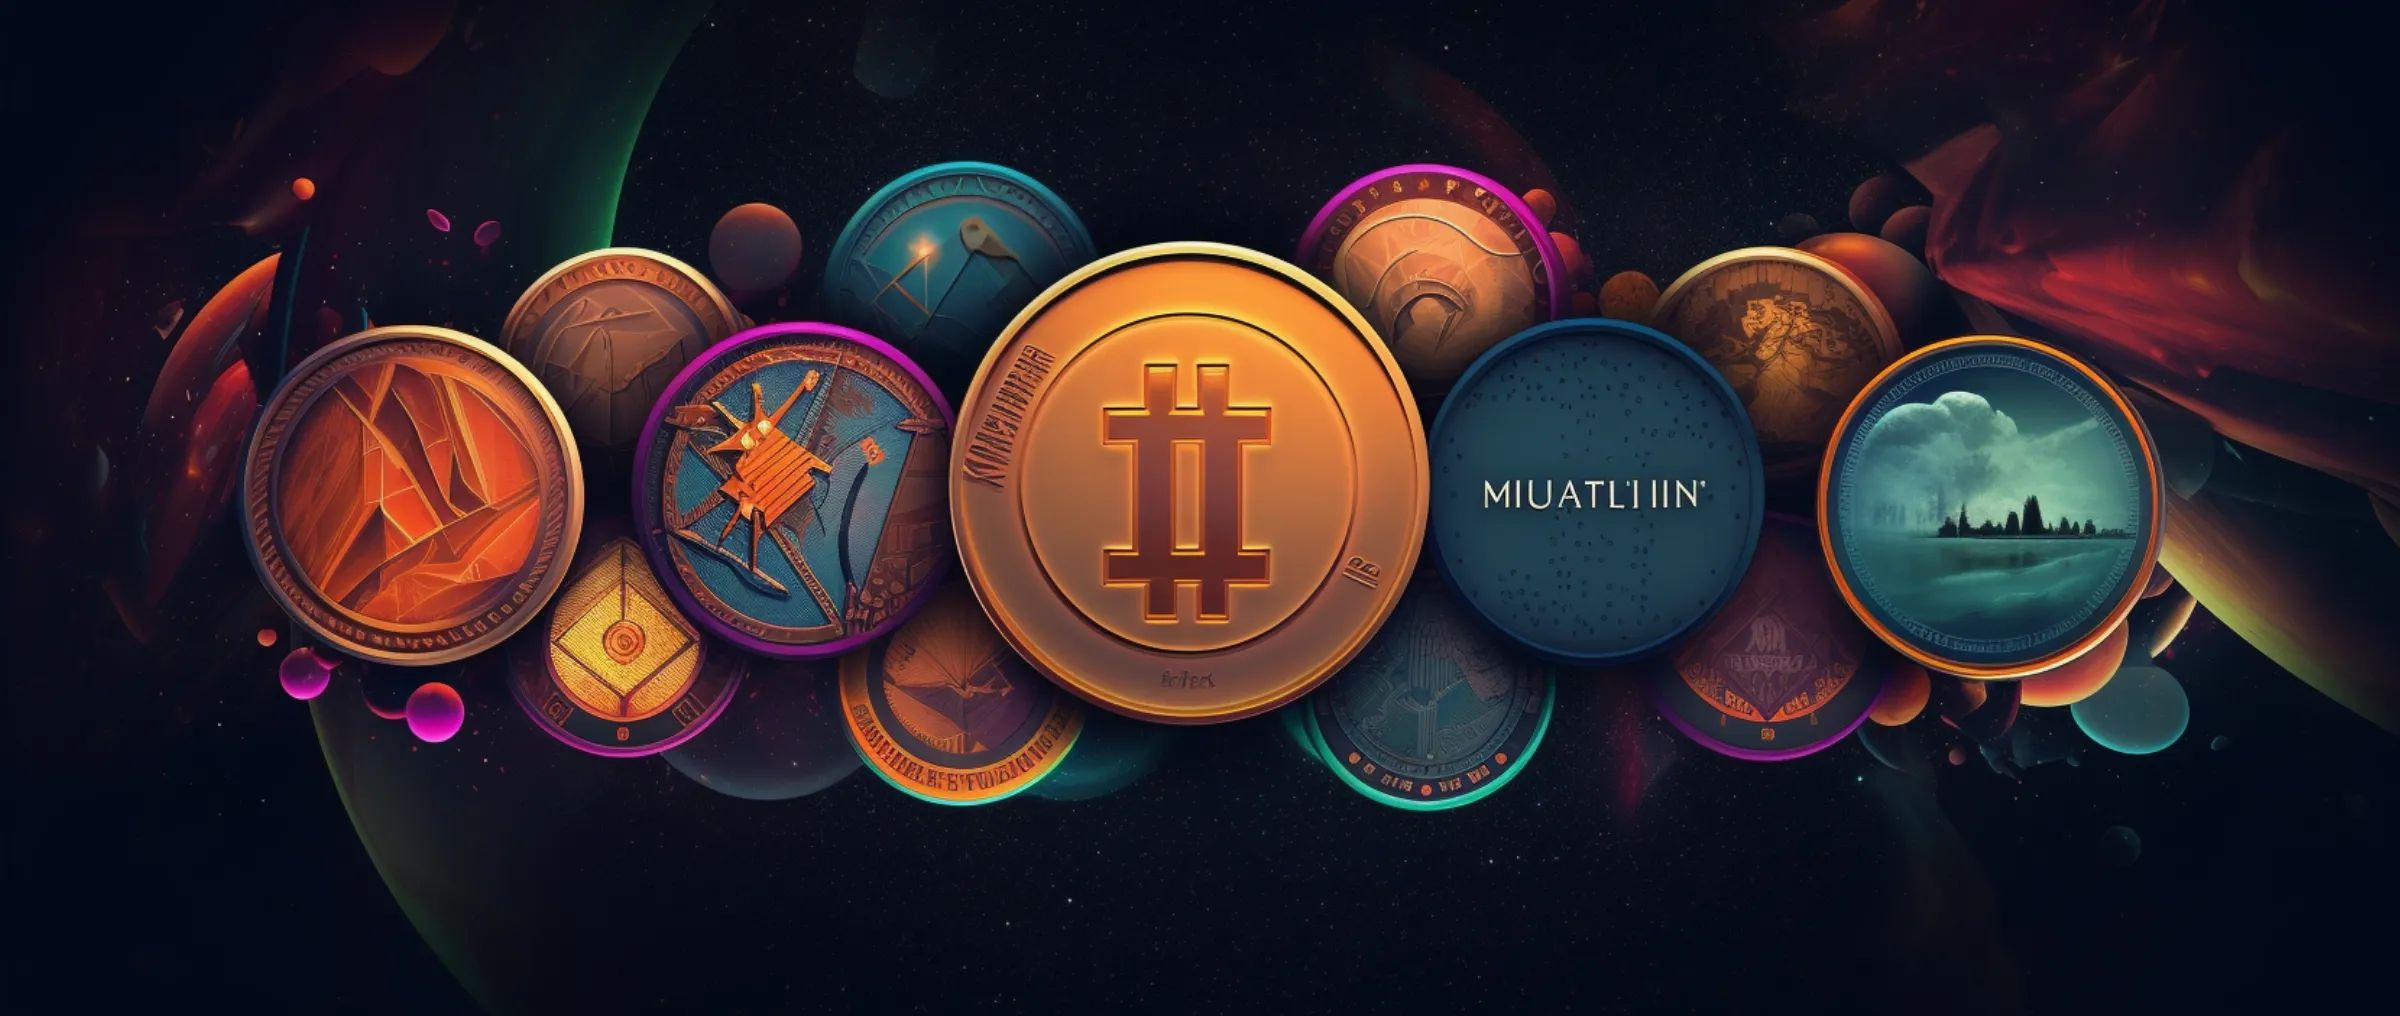 Multichain token experiences a 30 percent decline due to delay in backend upgrade